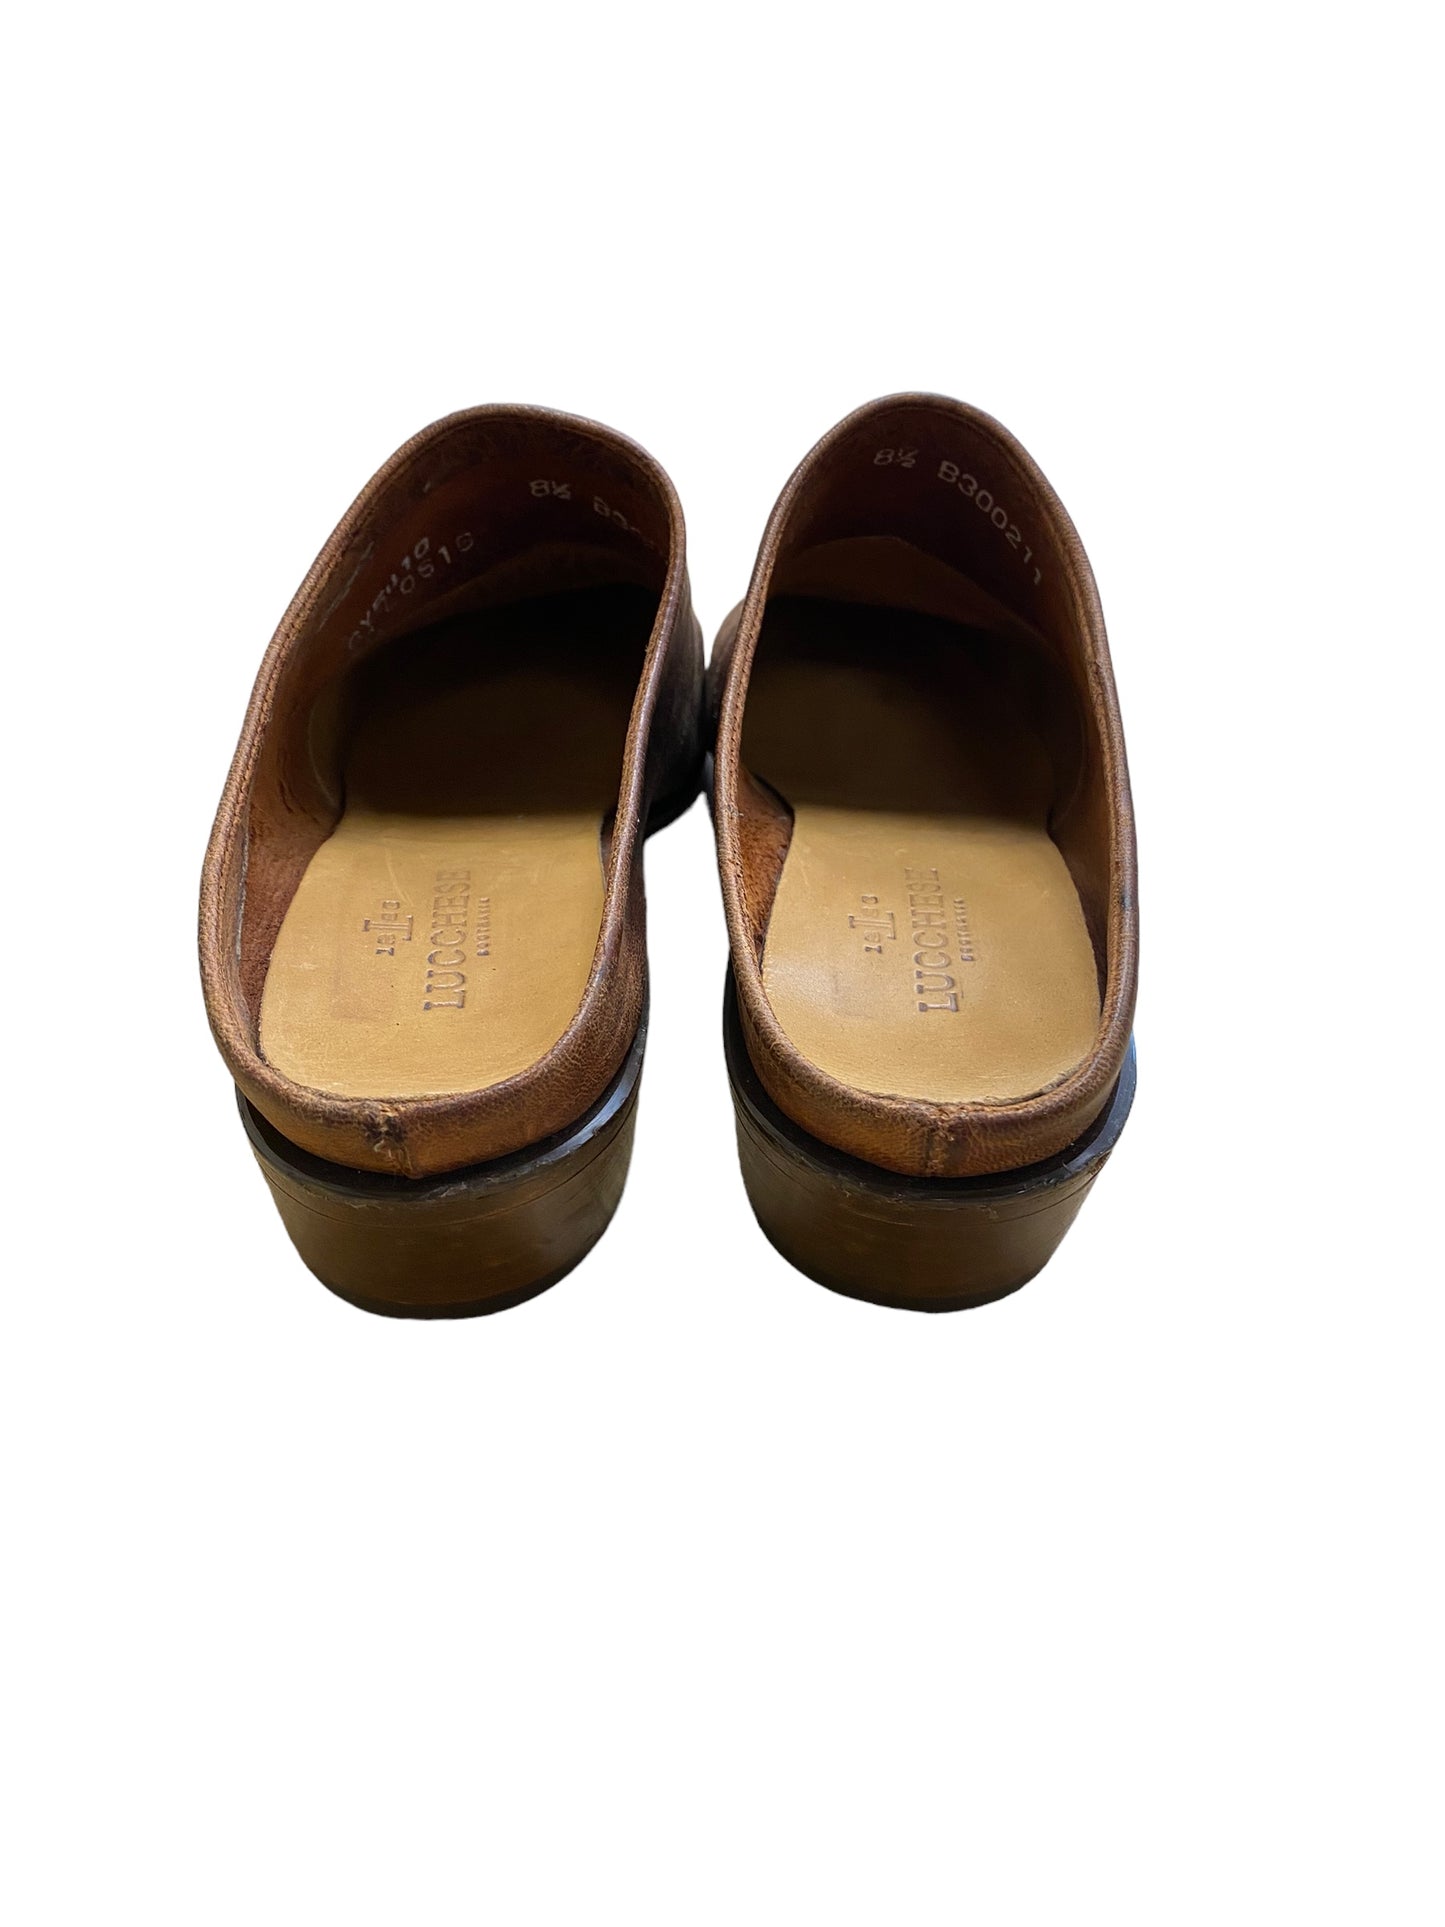 Shoes Flats By Lucchese  Size: 8.5